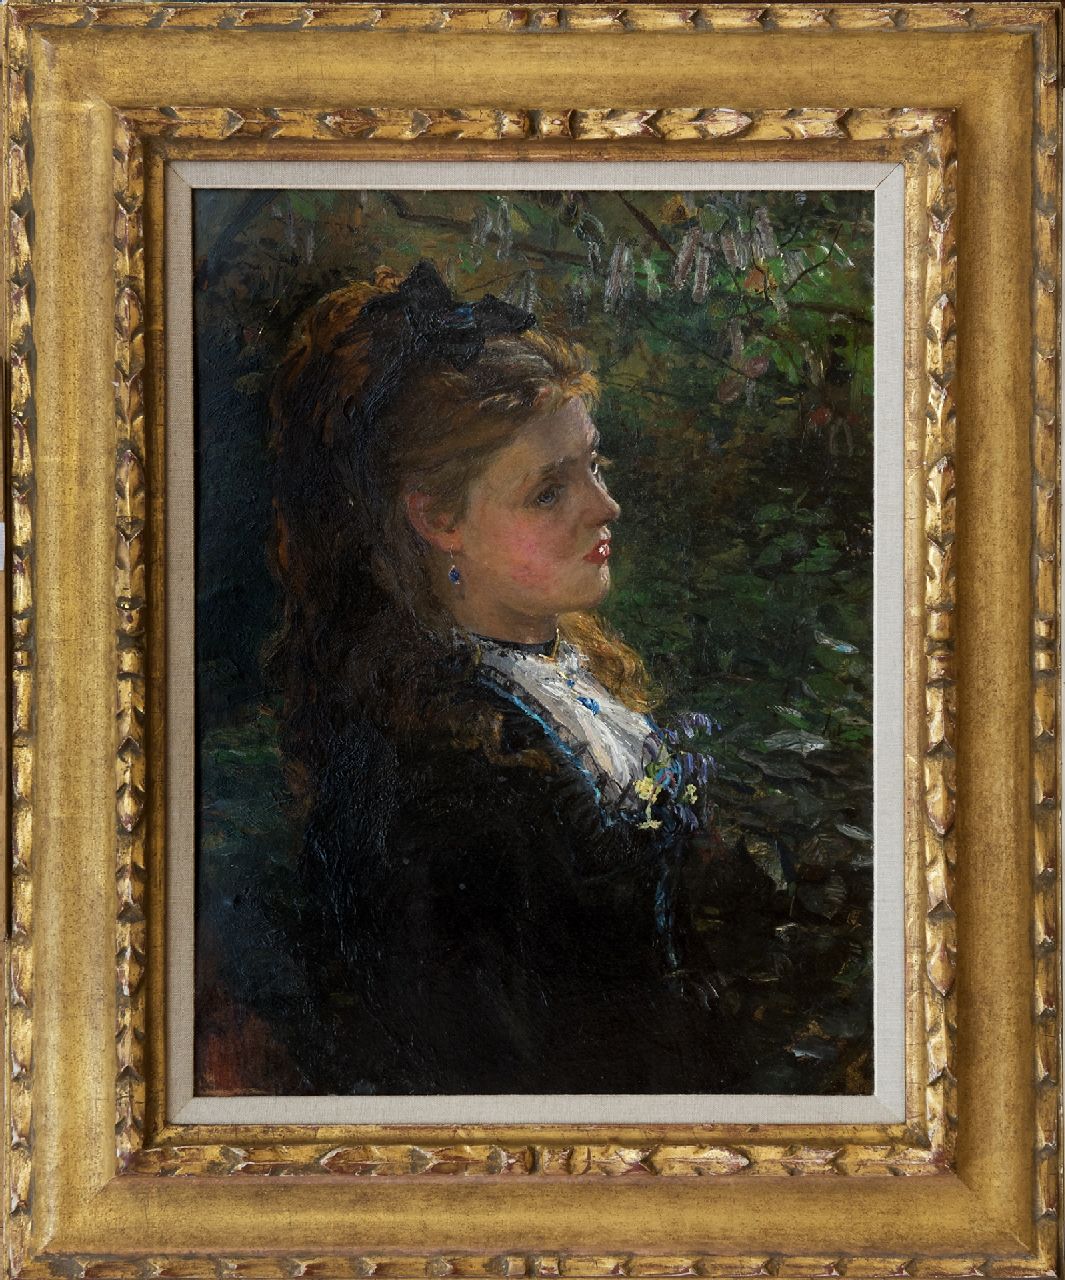 Beckwith J.C.  | James Carroll Beckwith | Paintings offered for sale | Portrait of a young woman, ca 1875 probably the younge Émilie-Louise Delabigne (Valtesse de la Bigne)., oil on board 40.0 x 30.0 cm, ca. 1875-1878